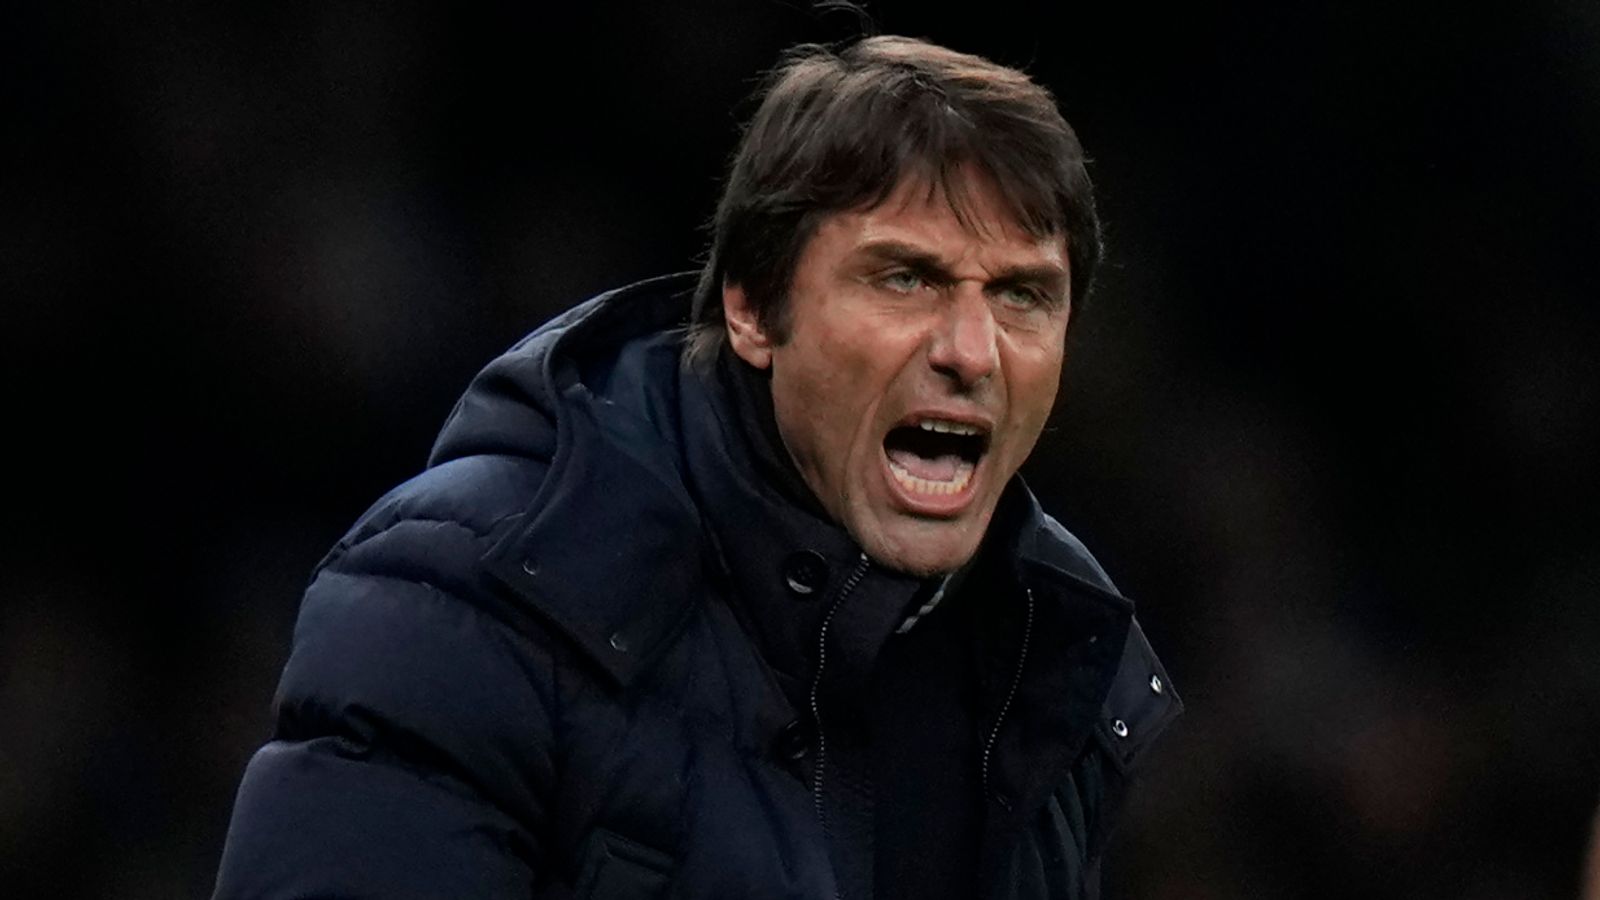 Back Antonio Conte to work his magic and lead Tottenham to a trophy at 3/1 – Jones Knows